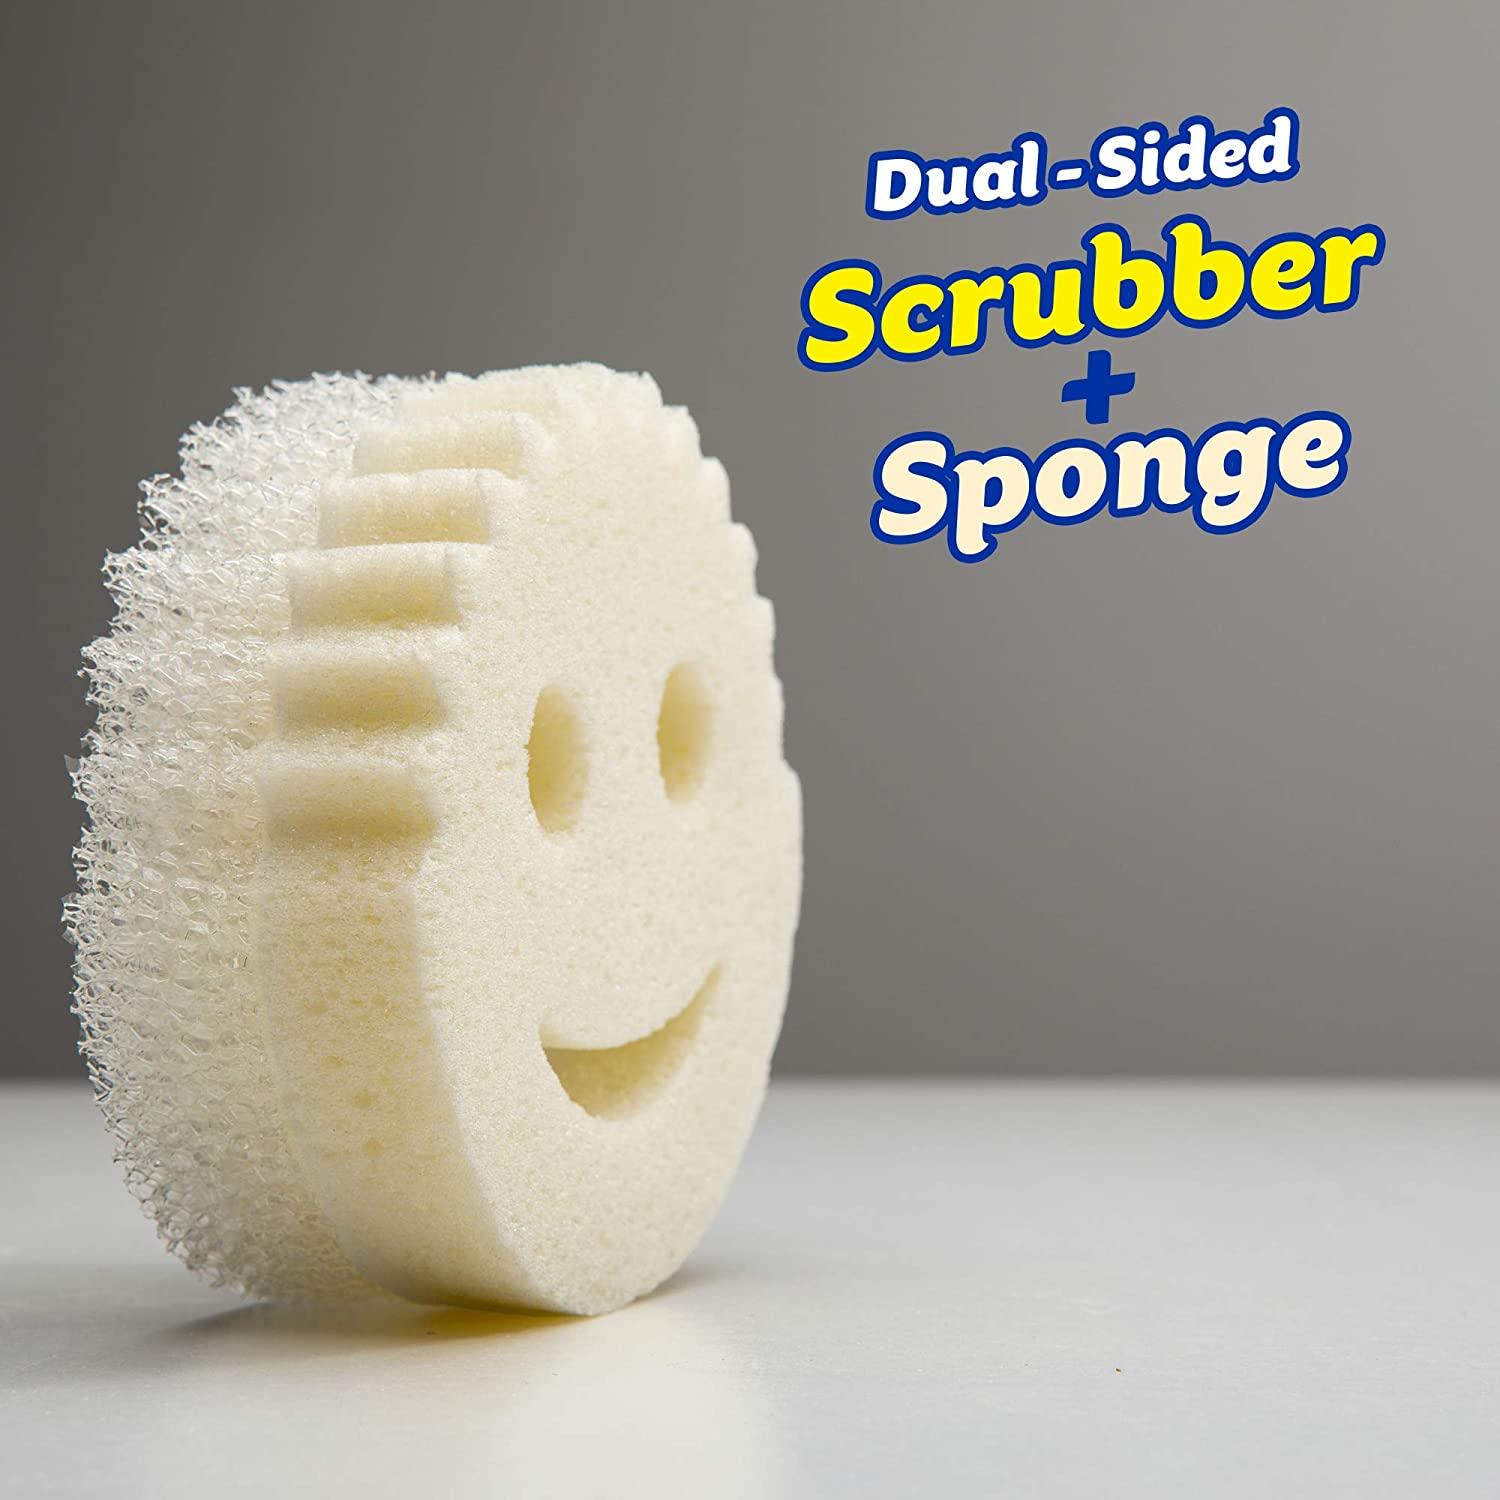 Scrub Daddy Dual-Sided Sponge and Scrubber- Scrub Mommy Dye Free -  Scratch-Free Scrubber for Dishes and Home, Odor Resistant, Soft in Warm  Water, Firm in Cold, Dishwasher Safe, 1ct (Pack of 2)